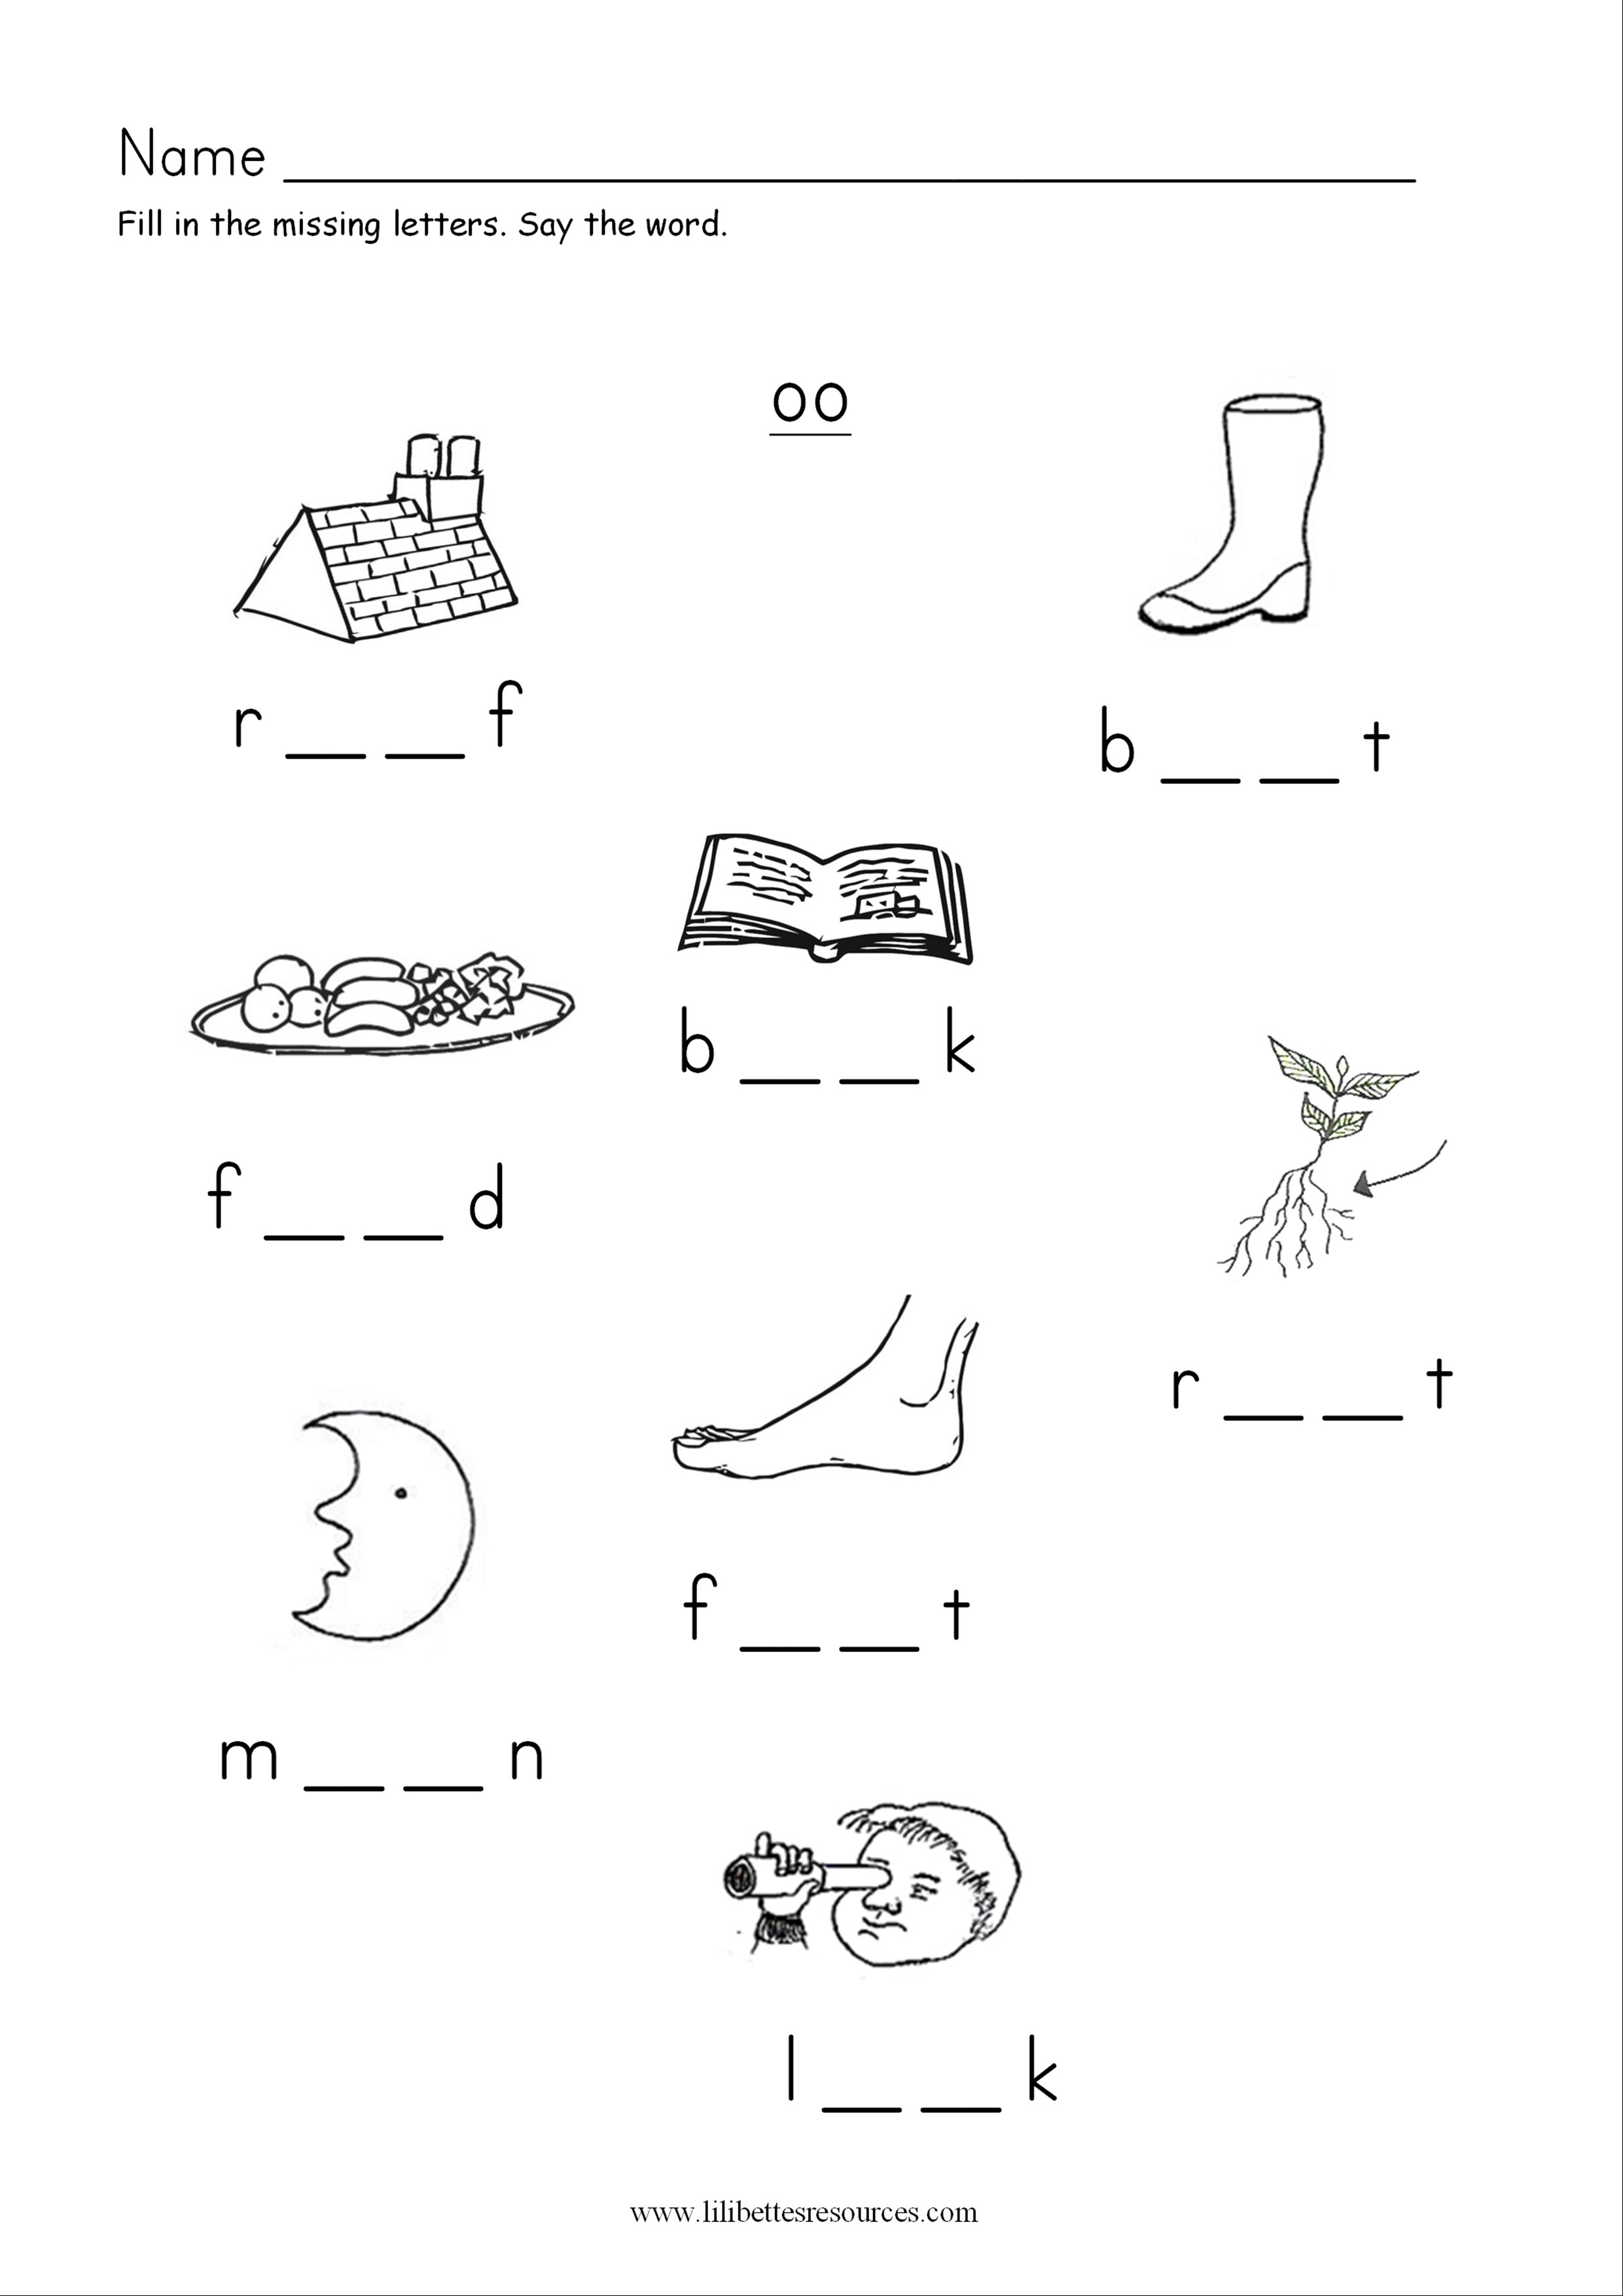 oo worksheets - Sound-it-out Phonics